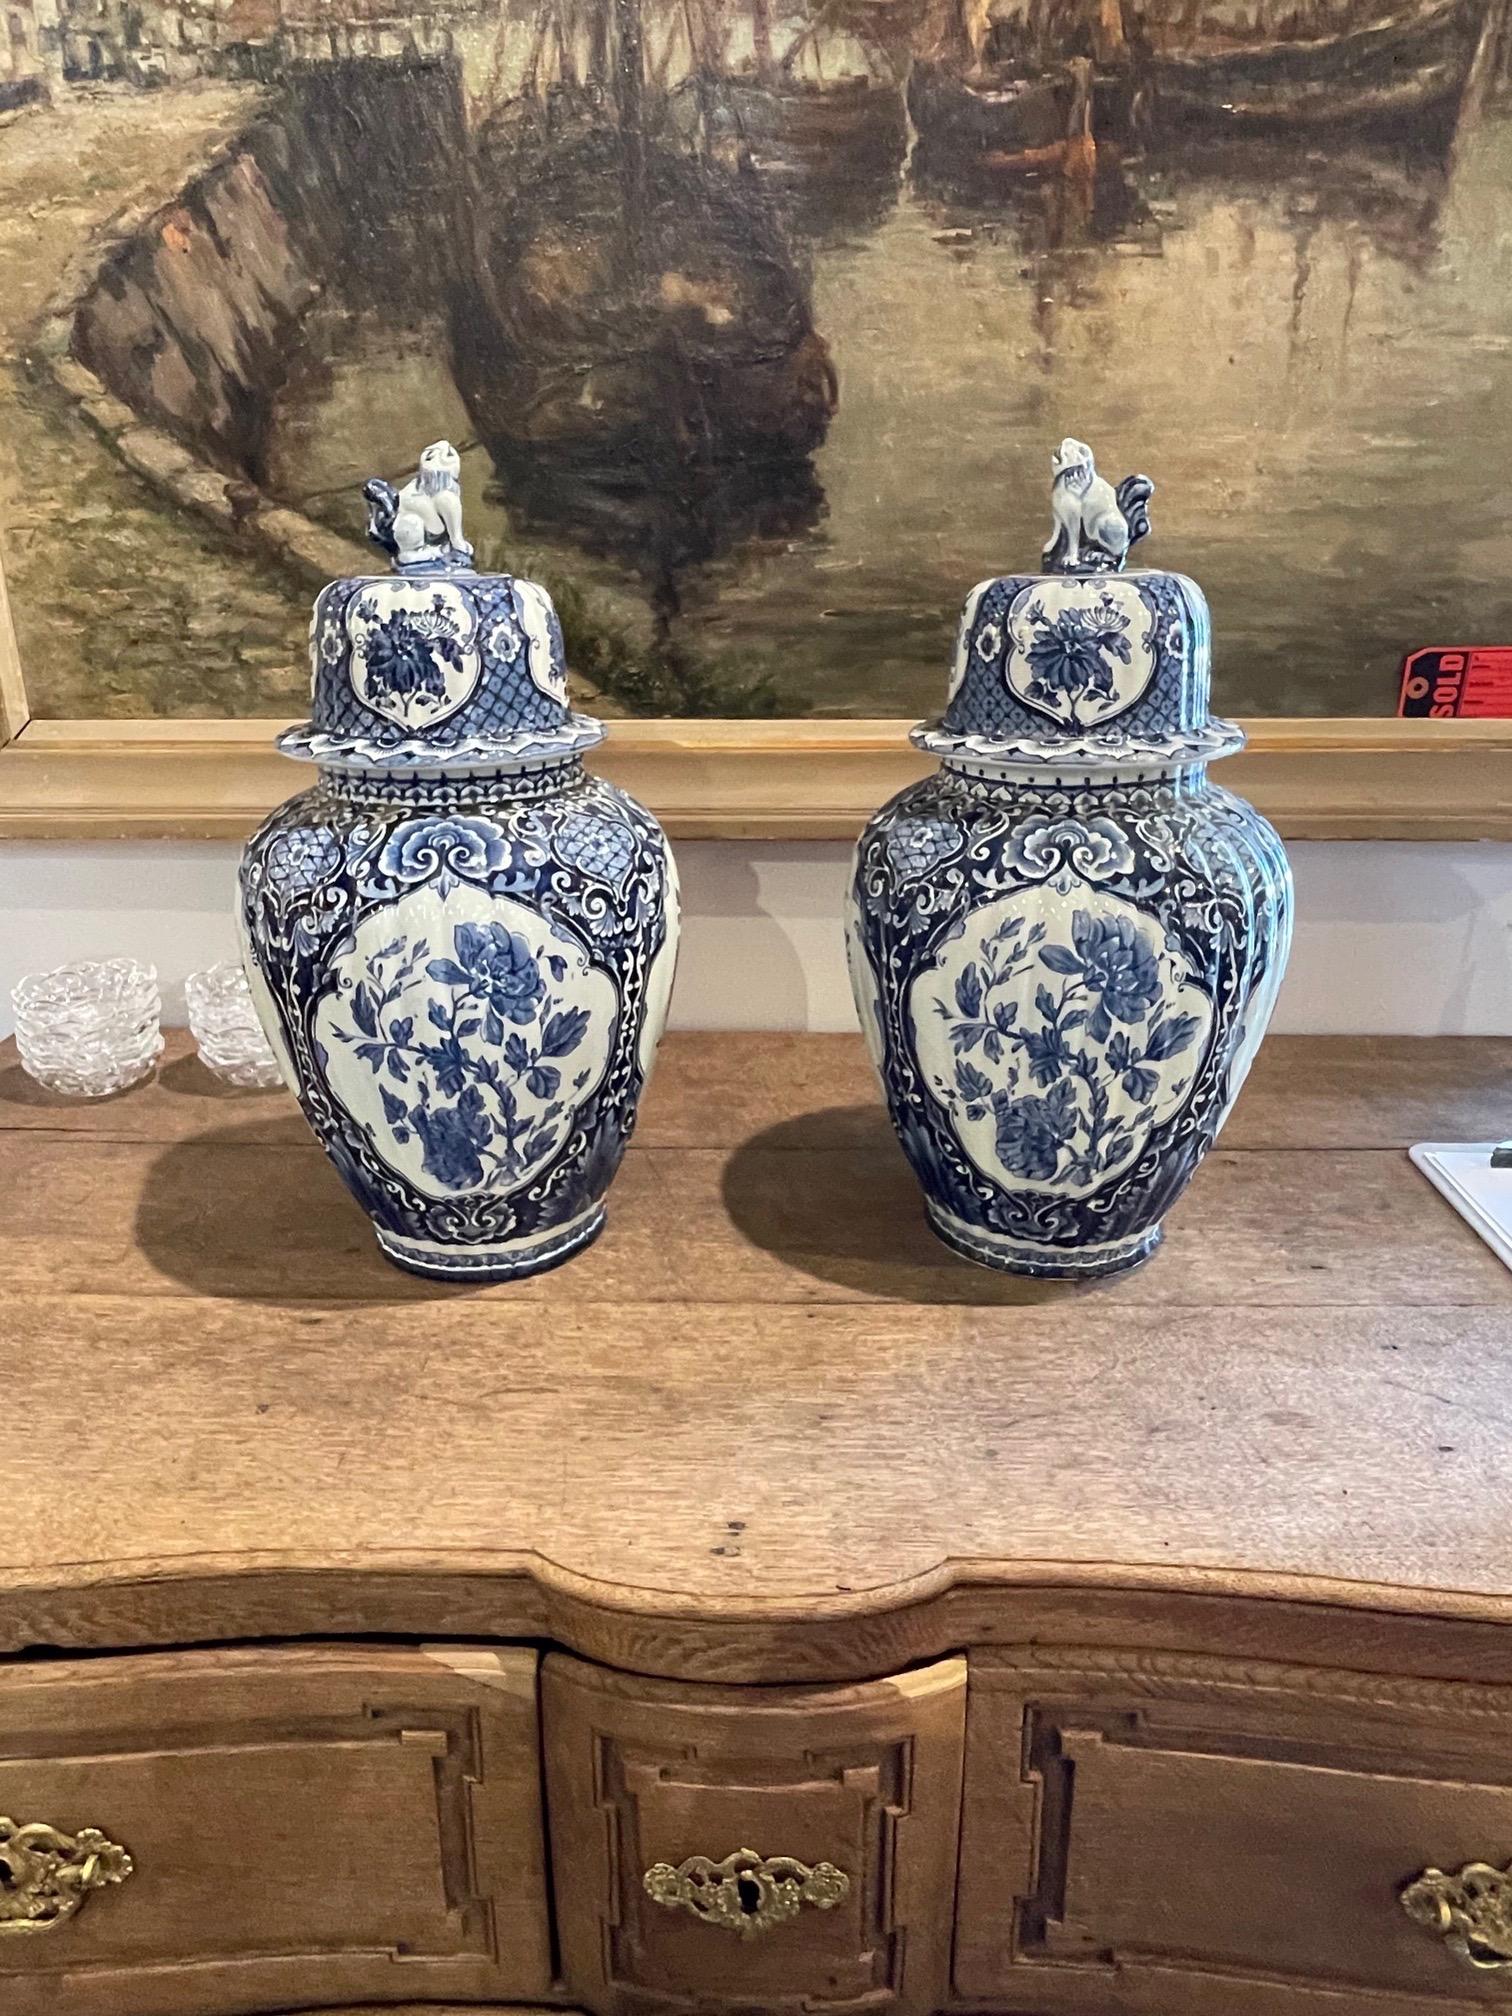 Decorative pair of Delft blue porcelain lidded vases. Beautiful floral pattern in gorgeous shades of blue. A fabulous accessory!!